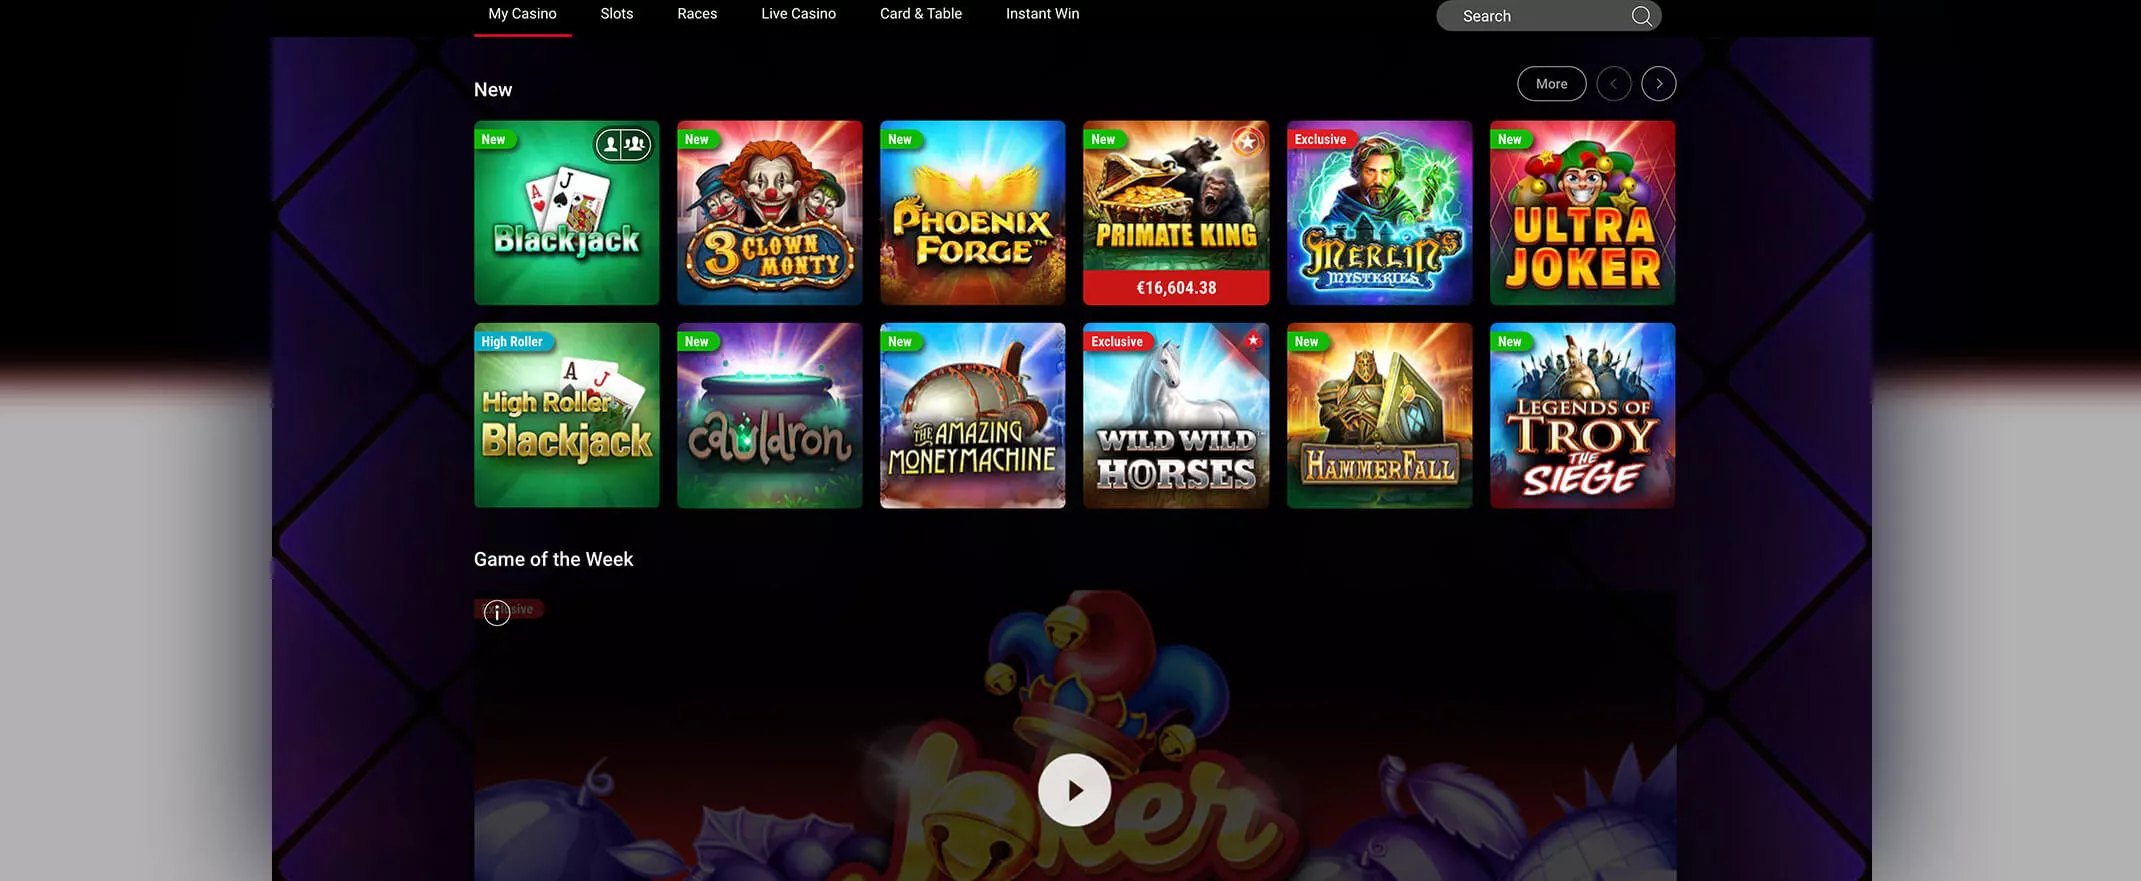 Pokerstars Casino review screenshot of the games page